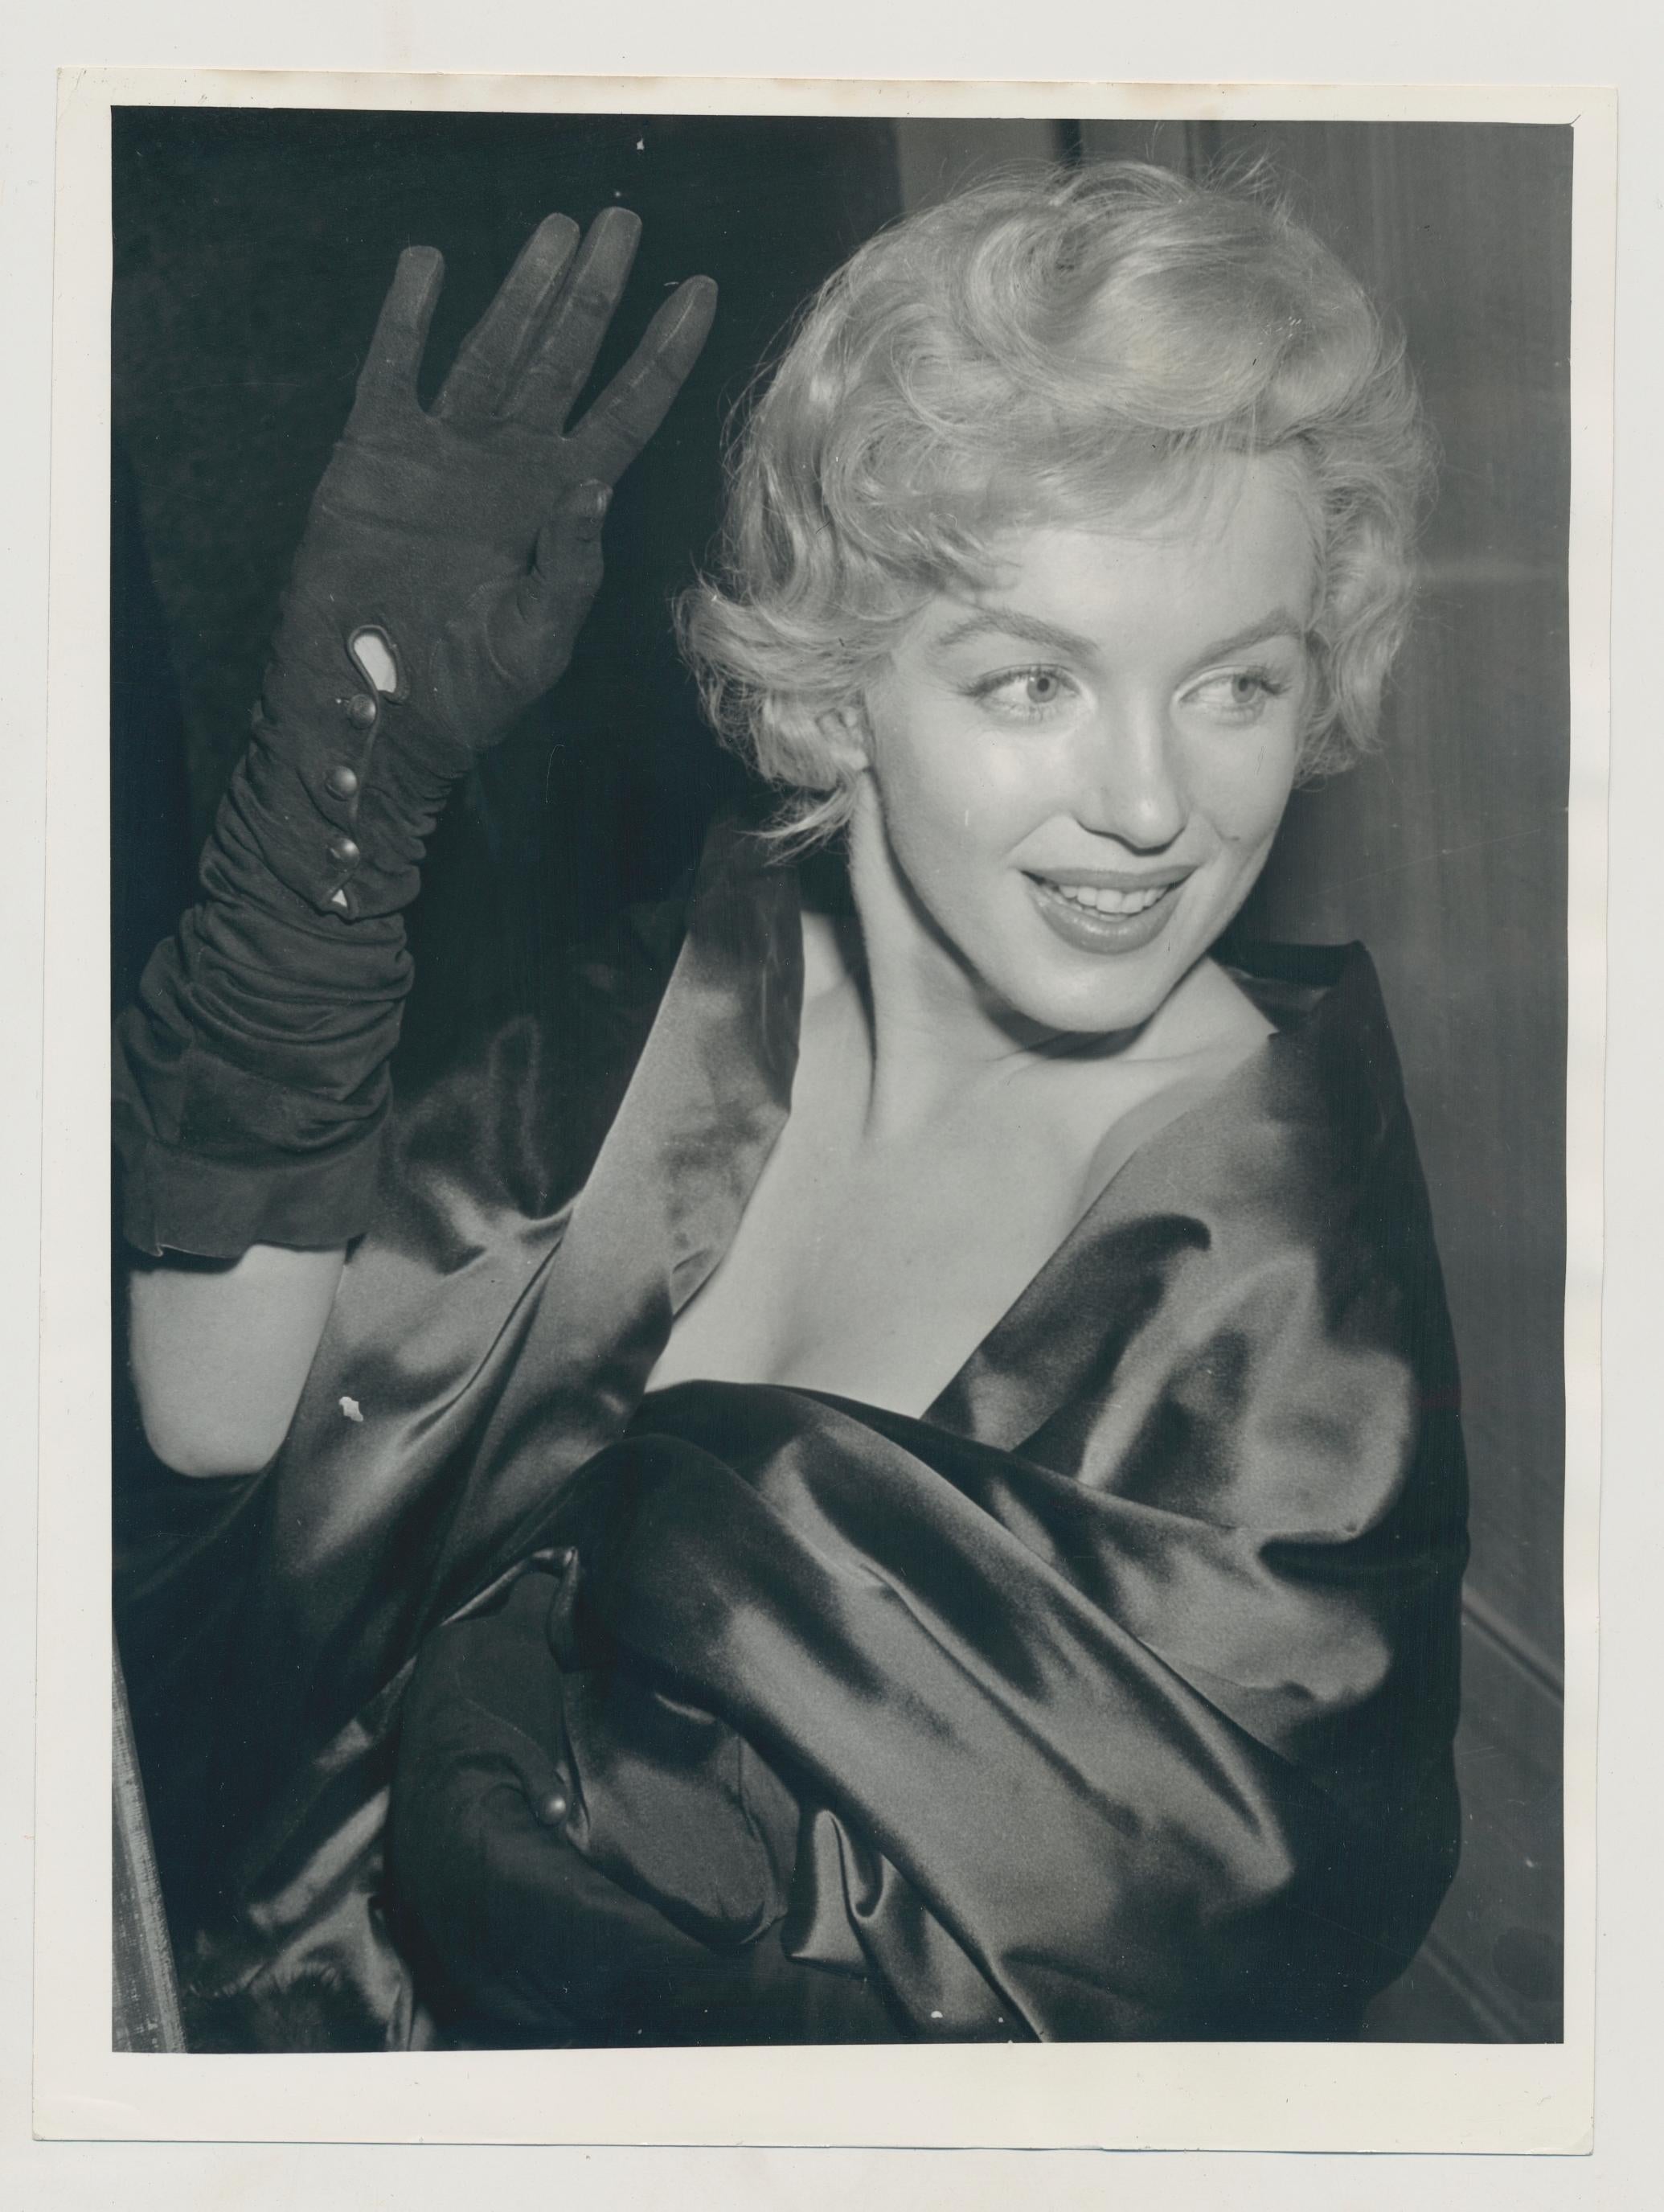 Unknown Portrait Photograph - Marilyn at London's Comedy Theatre, 1956, 21, 8 x 16, 4 cm